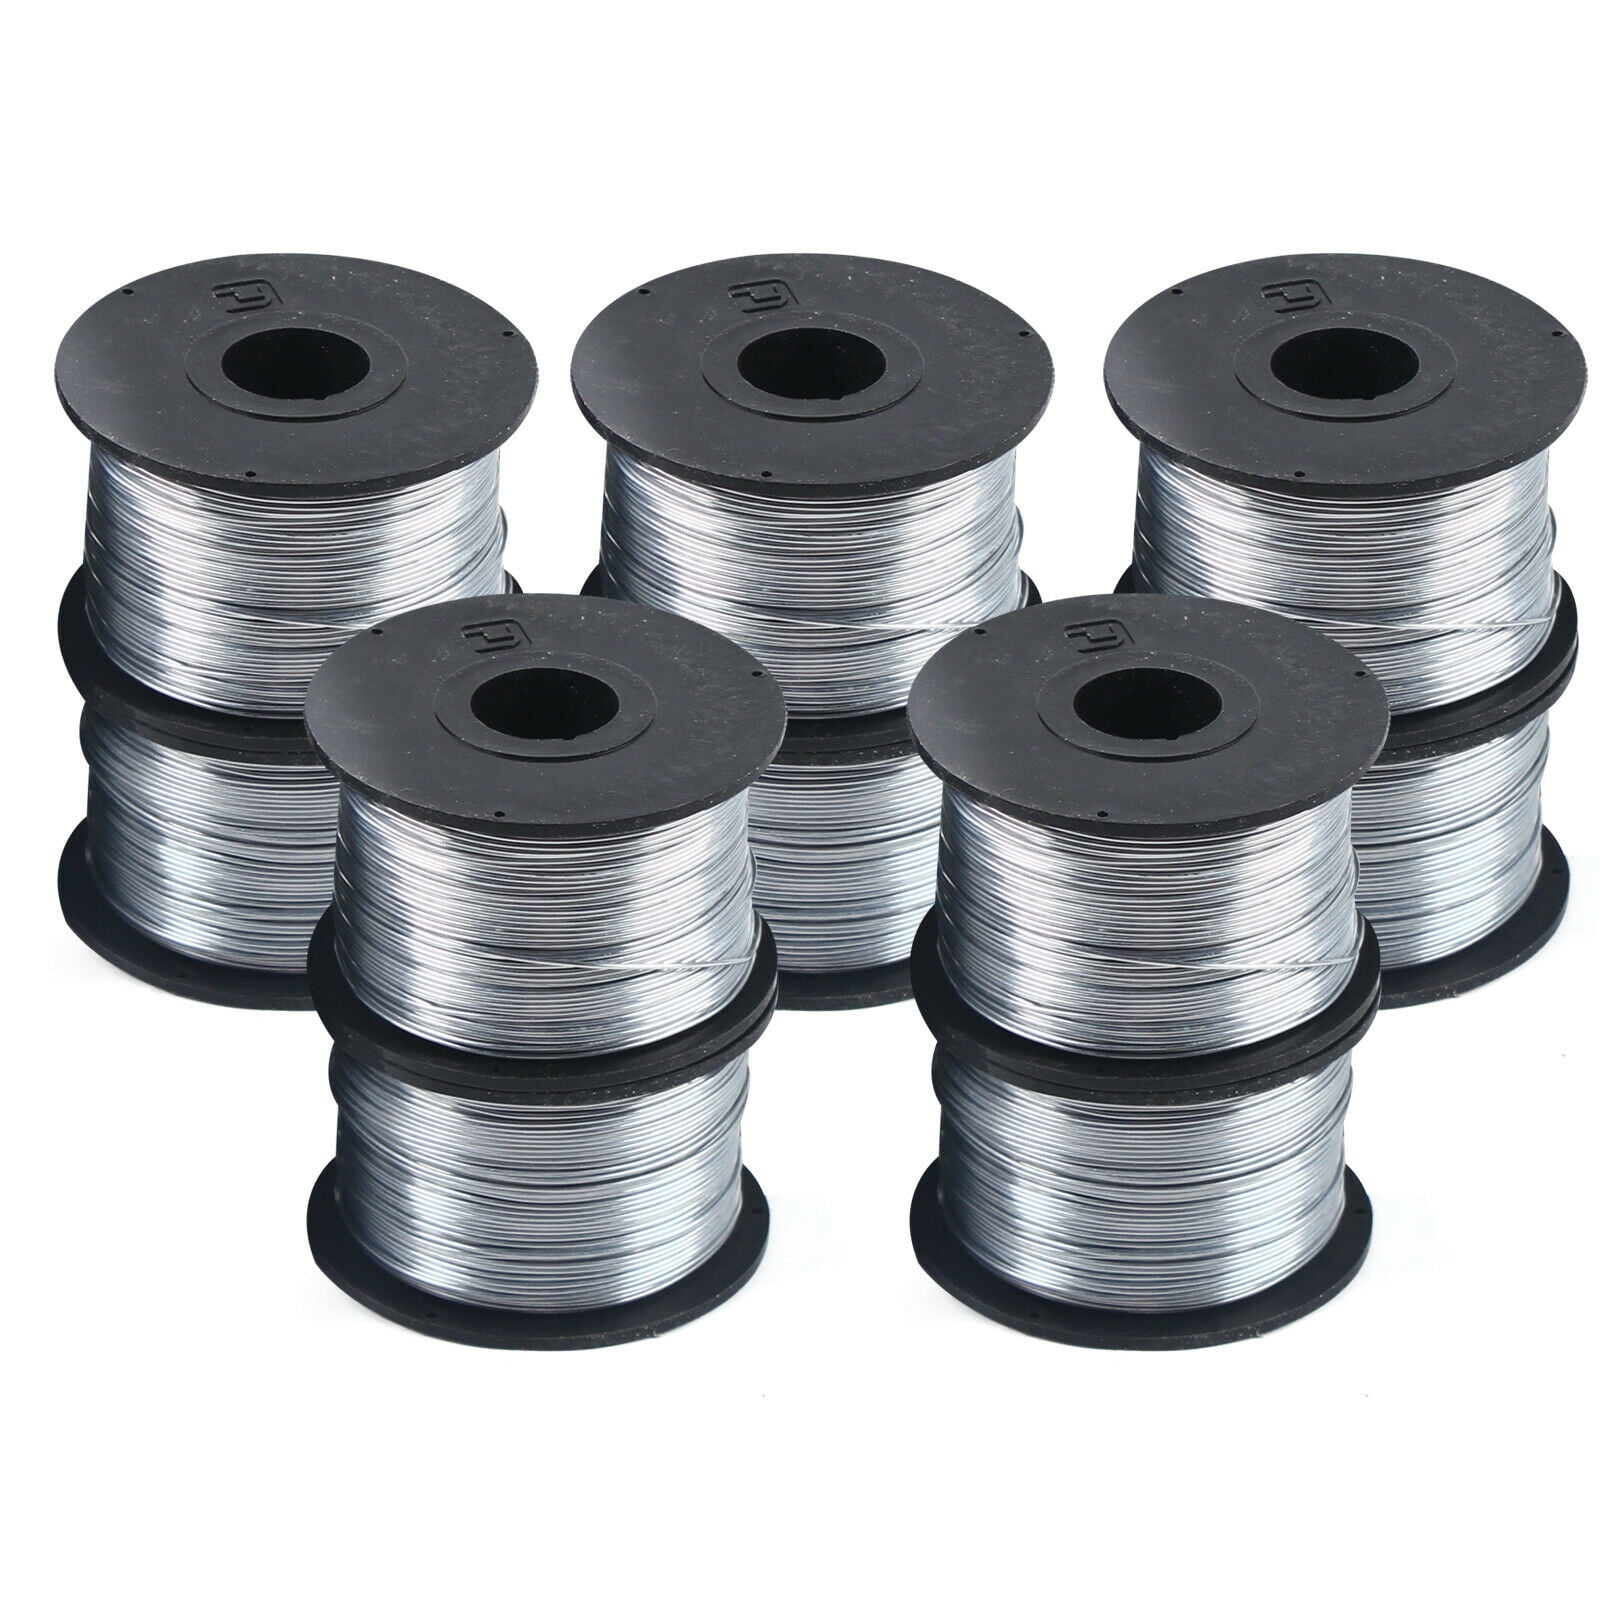 10Pcs 0.8mm 110m Rebar Tier Tying Wire Coil For Automatic Rebar Tying Machine 